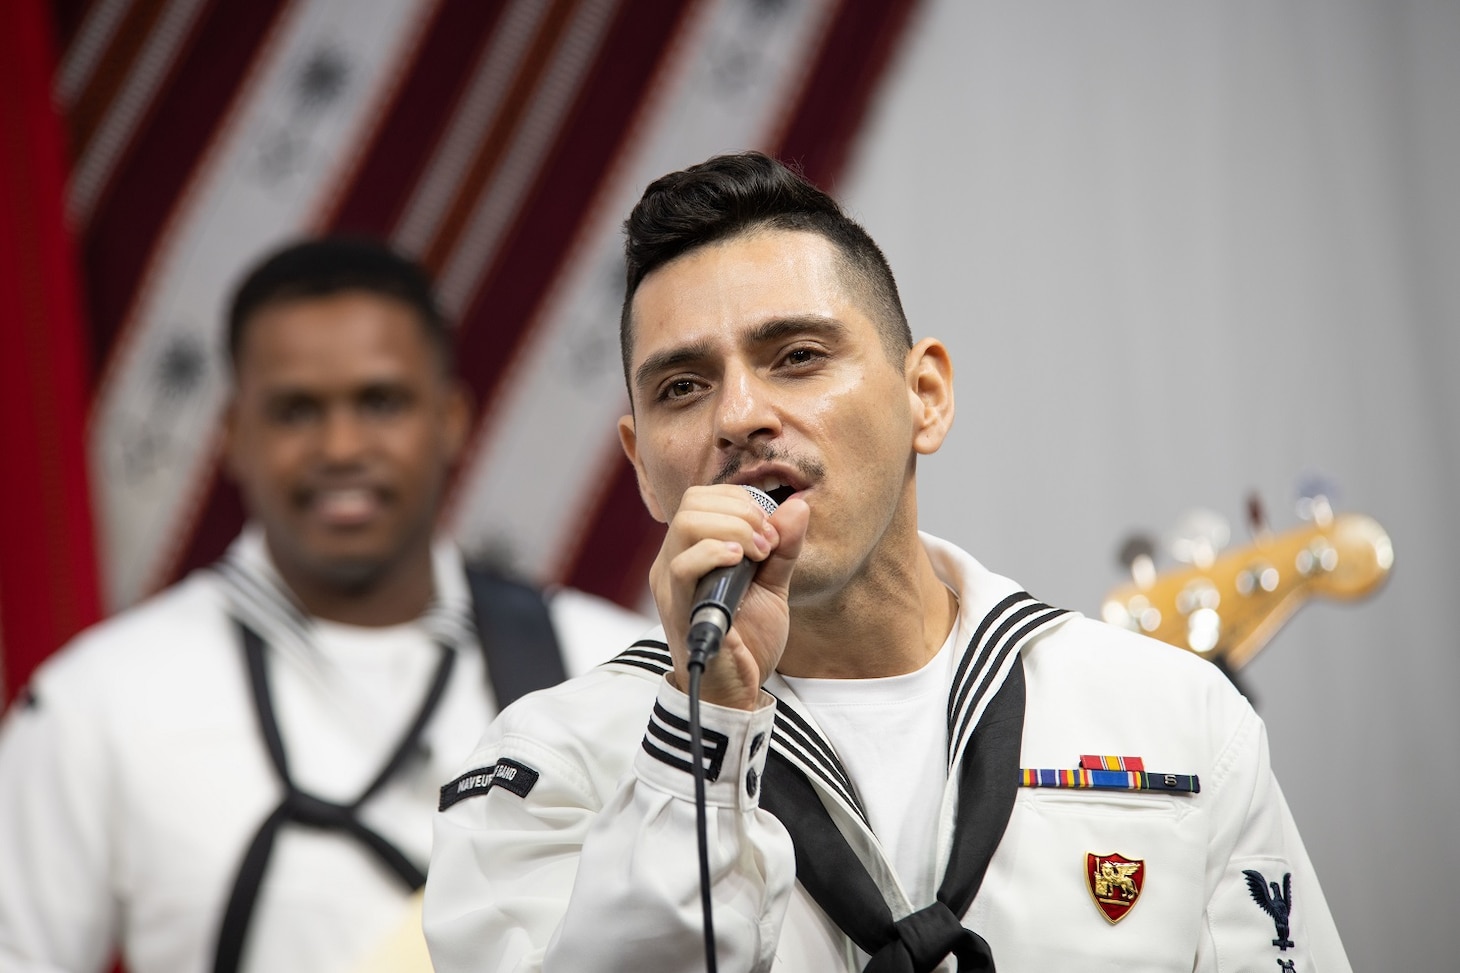 DJIBOUTI, Djibouti (March 7, 2023) - U.S Navy Musician Third Class Robert Novoa, lead vocalist, U.S. Naval Forces Europe and Africa Band, sings during a pre-recorded concert for Radio Television of Djibouti, (RTD); that will be broadcasted across Djibouti, March 7, 2023. Cutlass Express 2023, conducted by U.S. Naval Forces Africa (NAVAF) and sponsored by U.S. Africa Command (AFRICOM) is designed to assess and improve combined maritime law enforcement techniques, promote safety and security in the Western Indian Ocean, and increase interoperability between participating nations. U.S. Sixth Fleet, headquartered in Naples, Italy, conducts the full spectrum of joint and naval operations, often in concert with allied and interagency partners, in order to advance U.S. national interests and security and stability in Europe and Africa. (U.S. Navy photo by Mass Communication Specialist 1st Class Randi R. Brown)